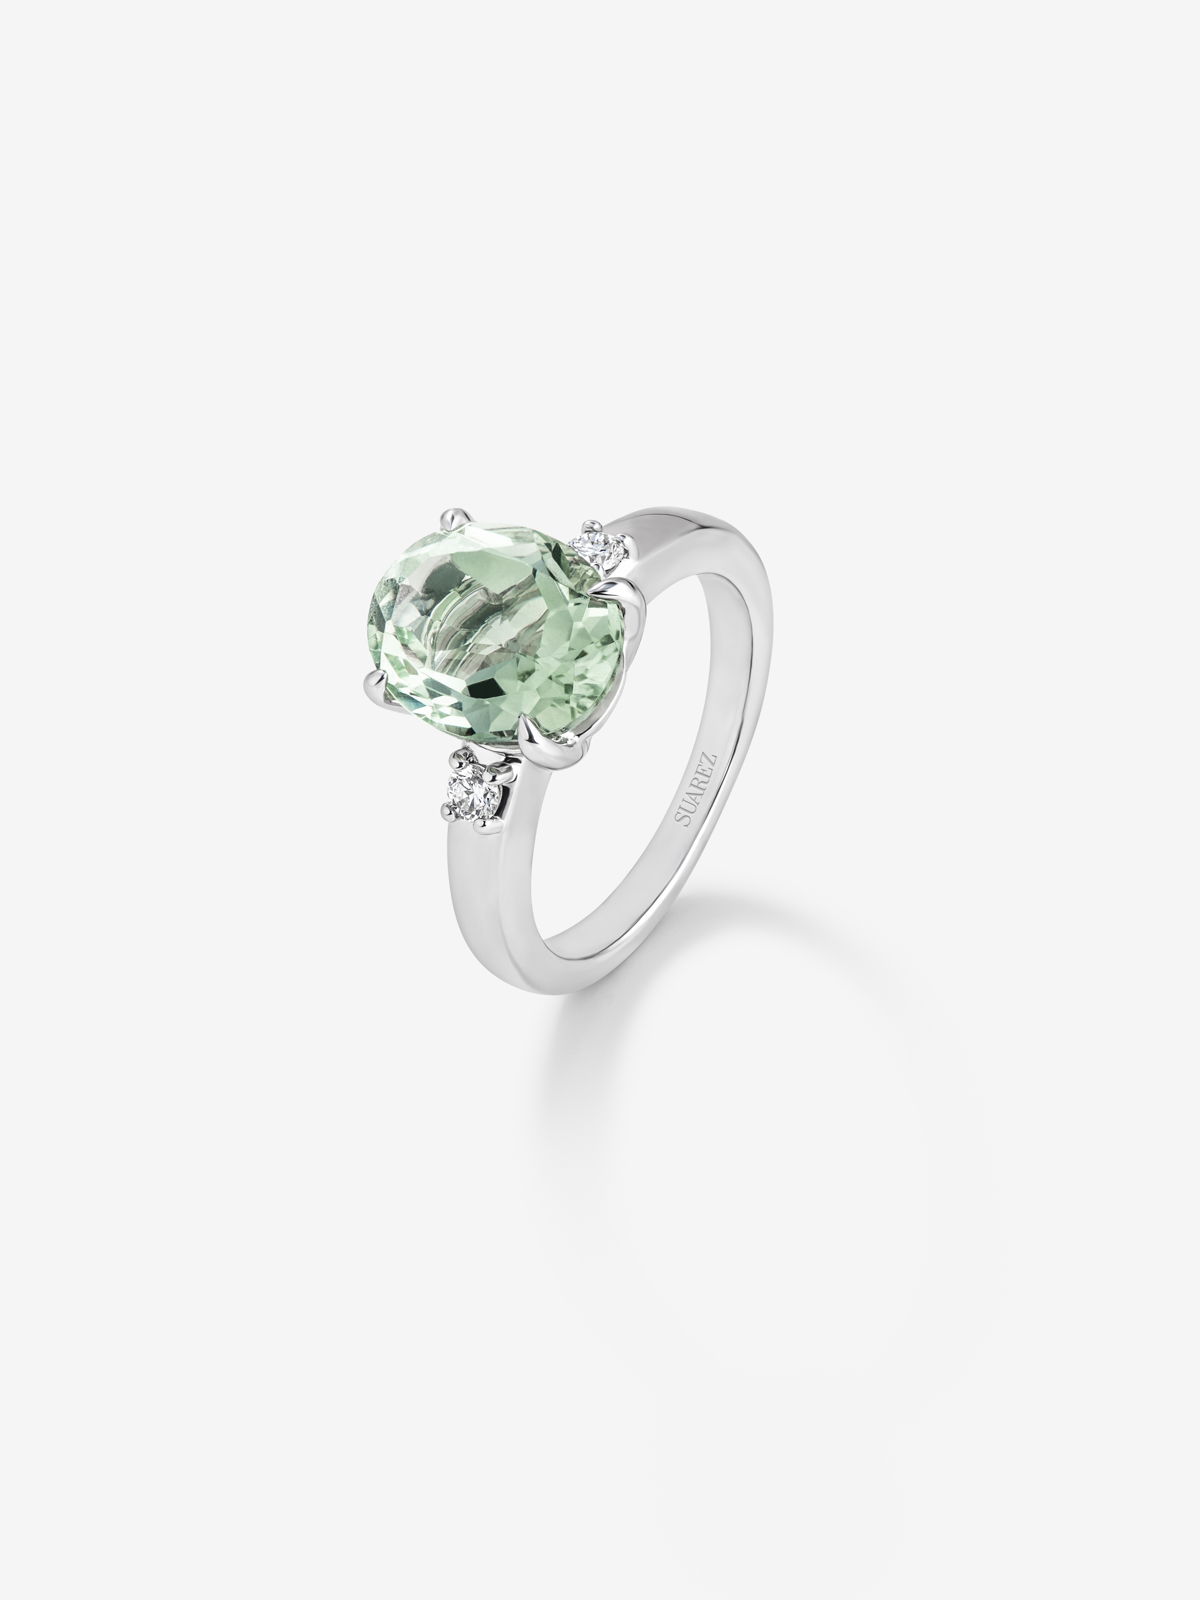 925 Silver trio ring with green amethyst and diamonds